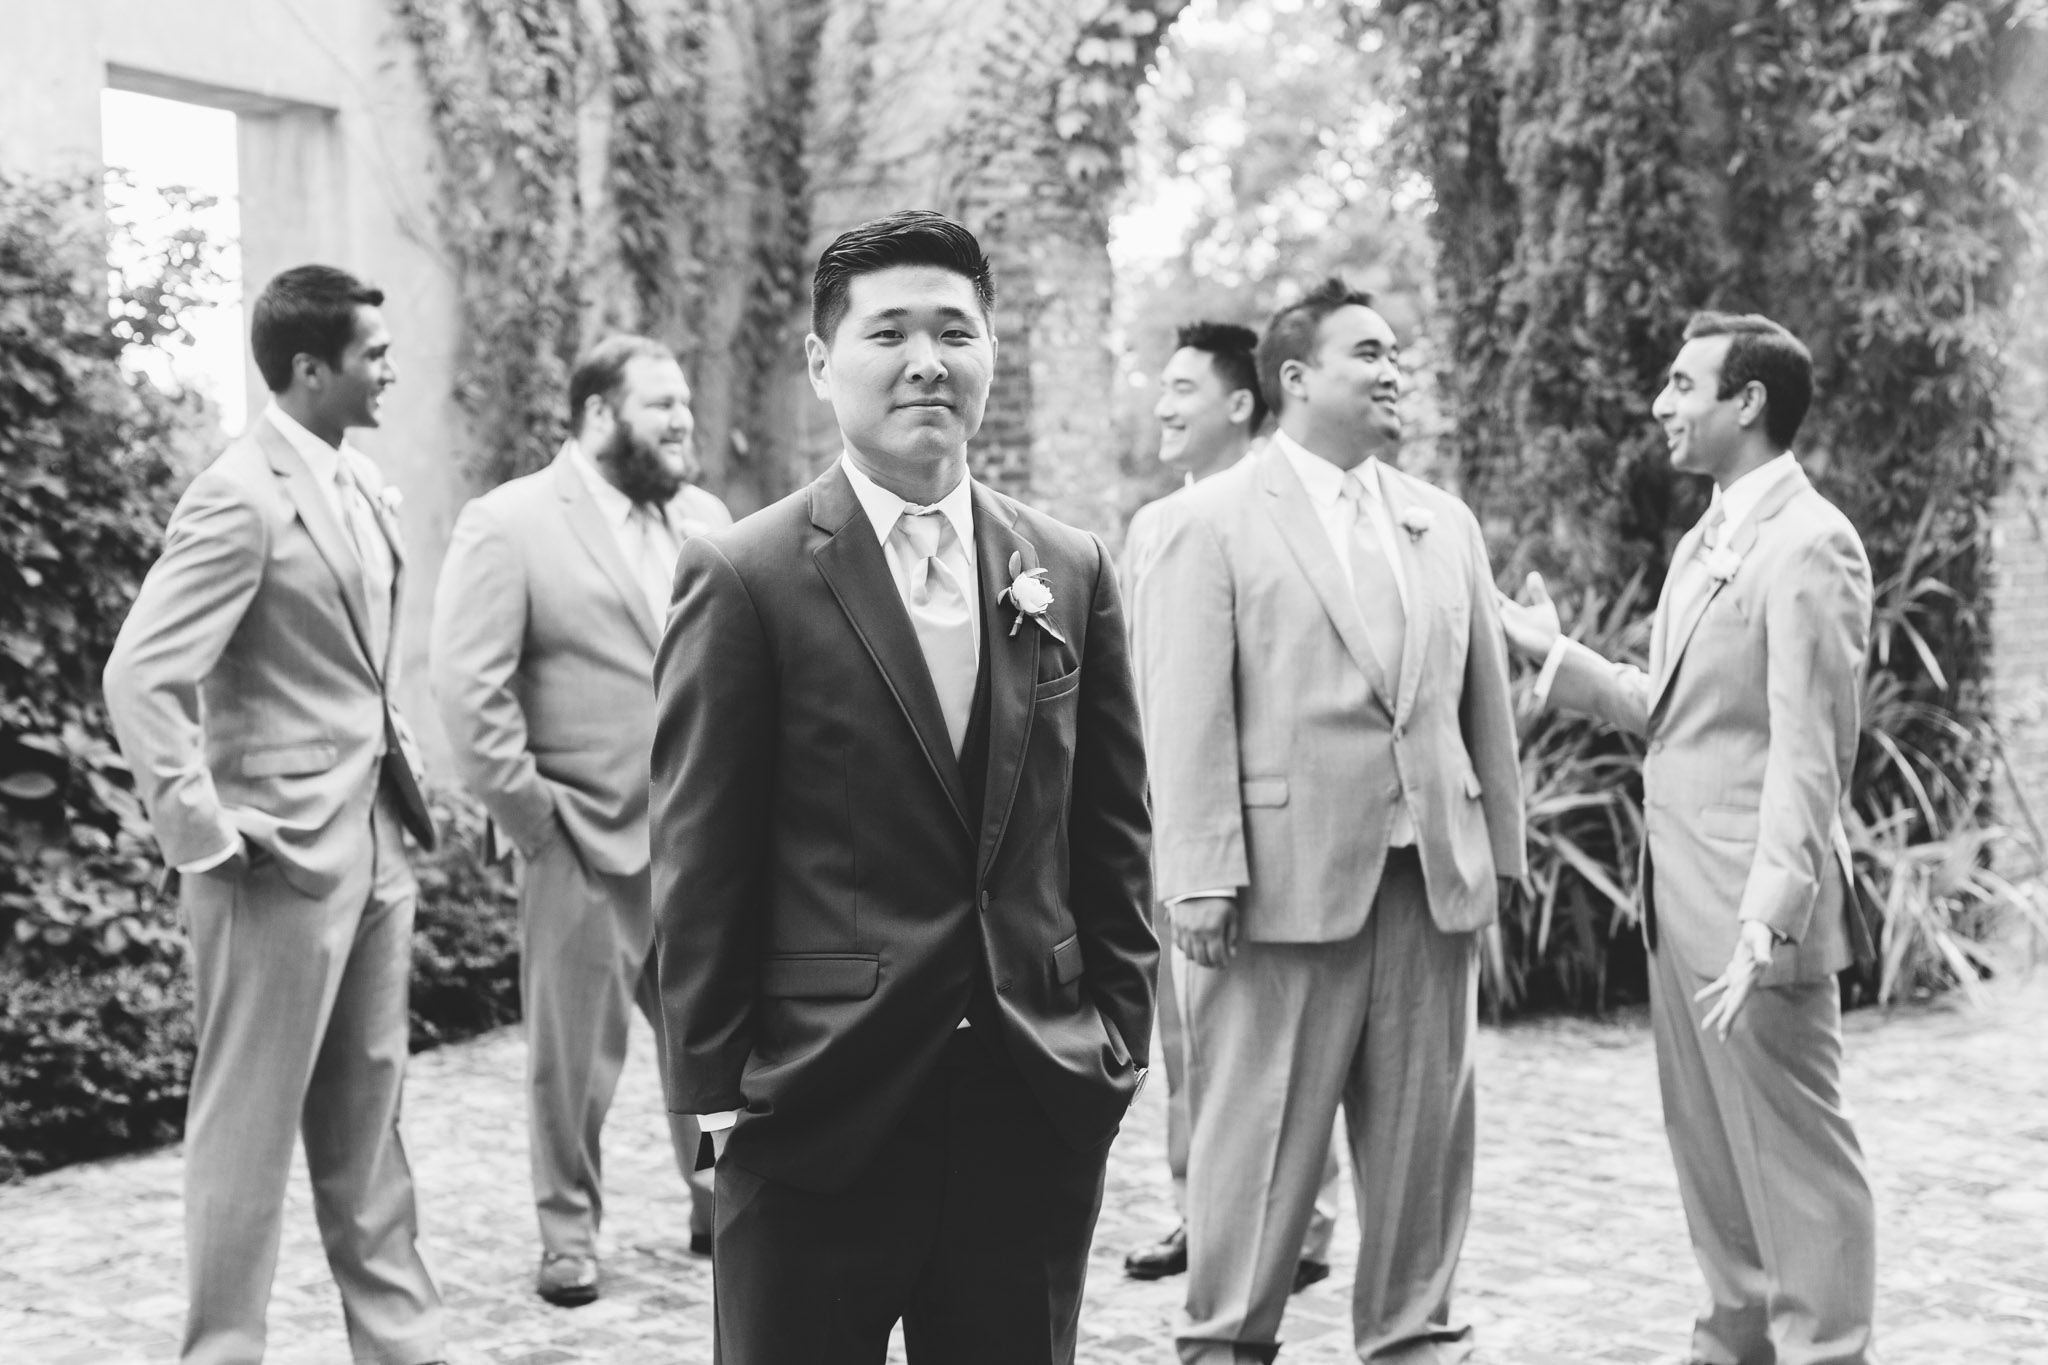 A groom and his men photographed by Summerour wedding photographer Rebecca Cerasani